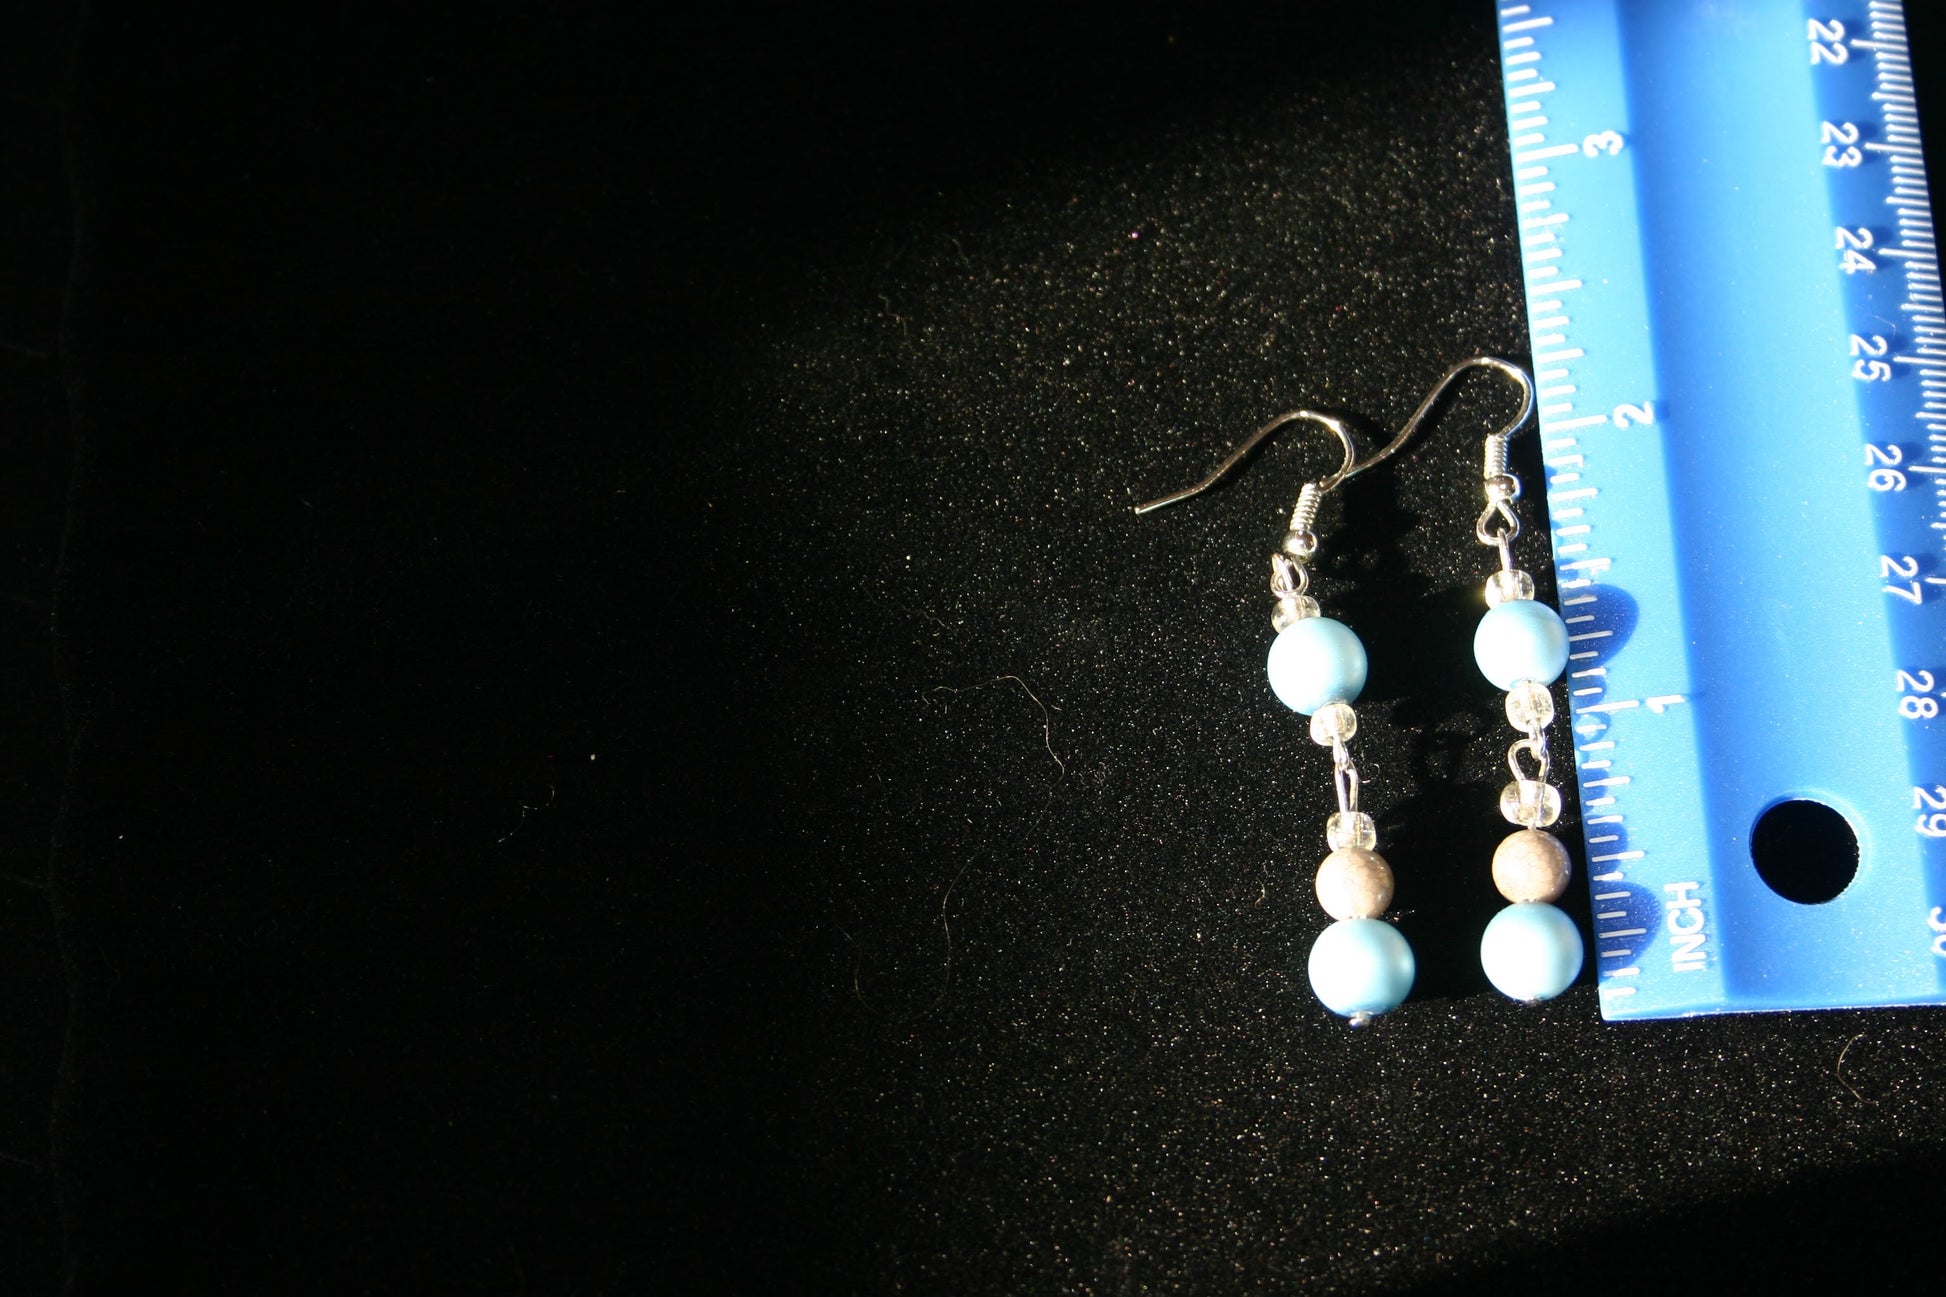 Earrings next to a ruler showing they are 2 inches long 